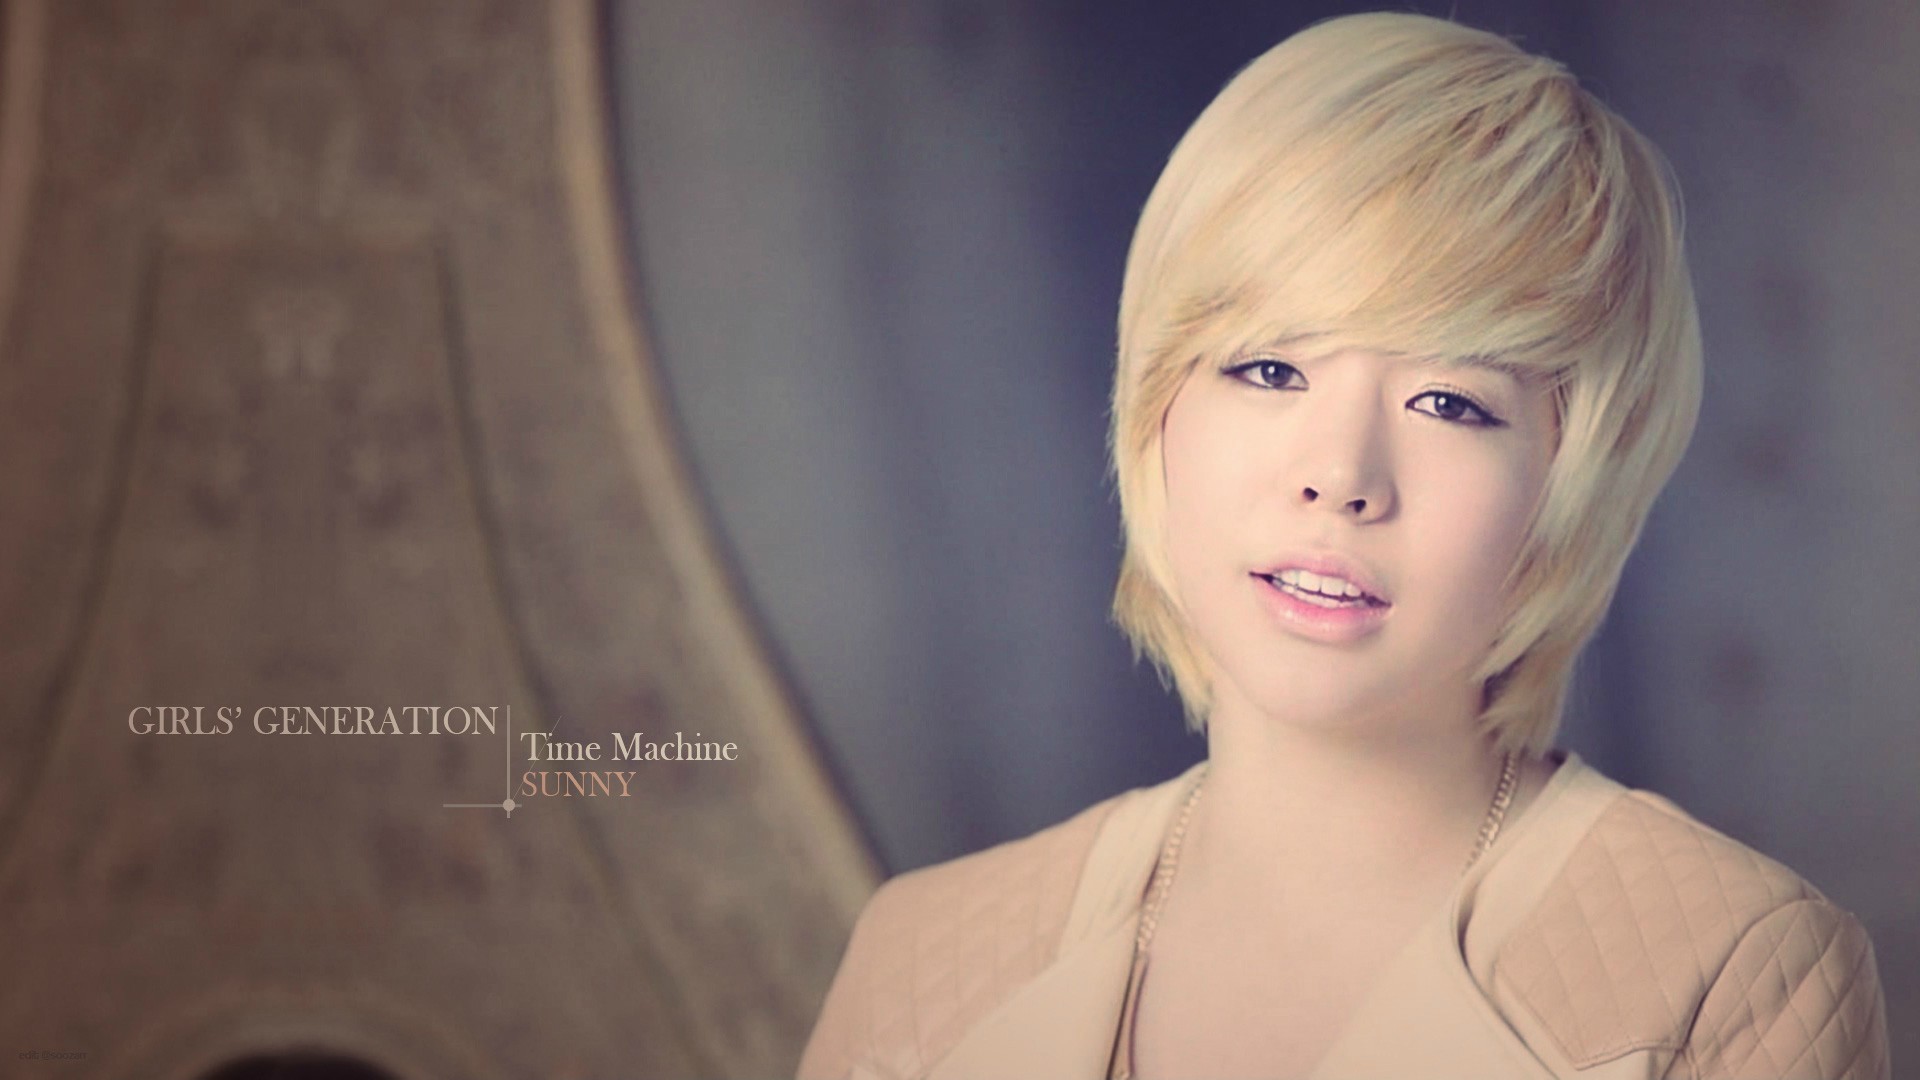 1920x1080 Snsd Sunny images Sunny Banner HD wallpaper and background photos